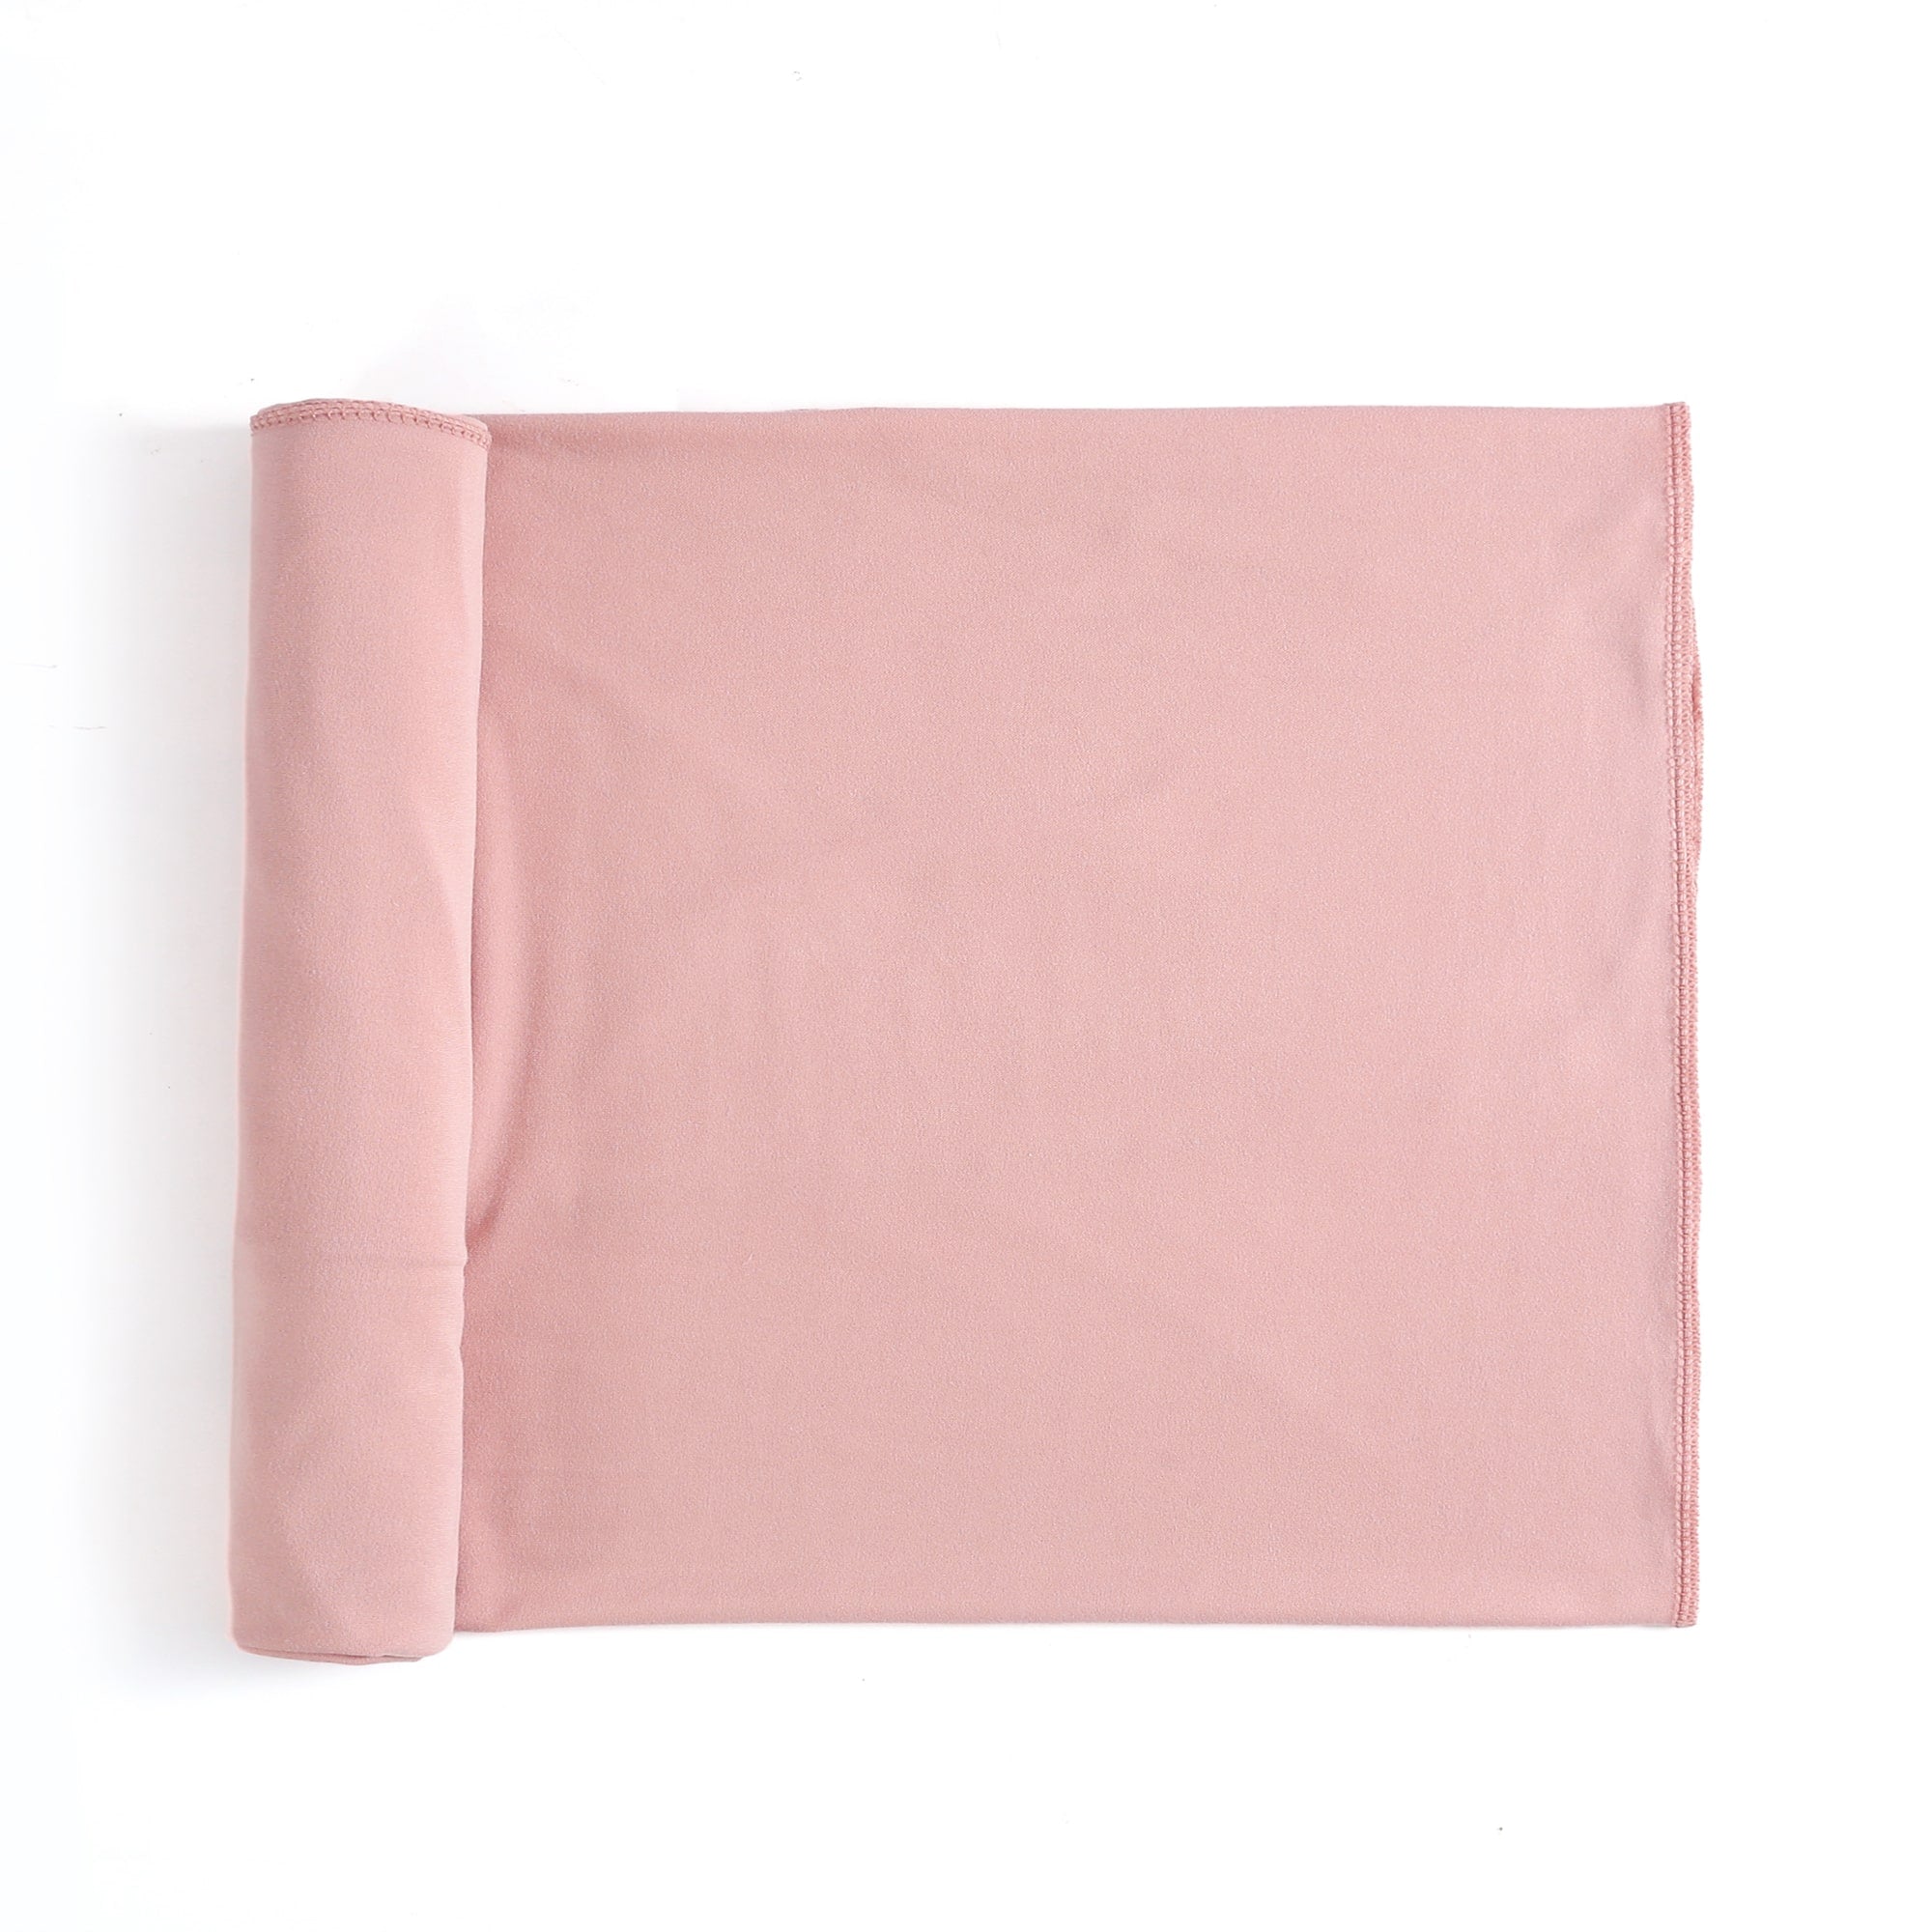 Baby Jersey Swaddle Wrap - Dusty Pink - Baby Swaddles at Louie Meets Lola